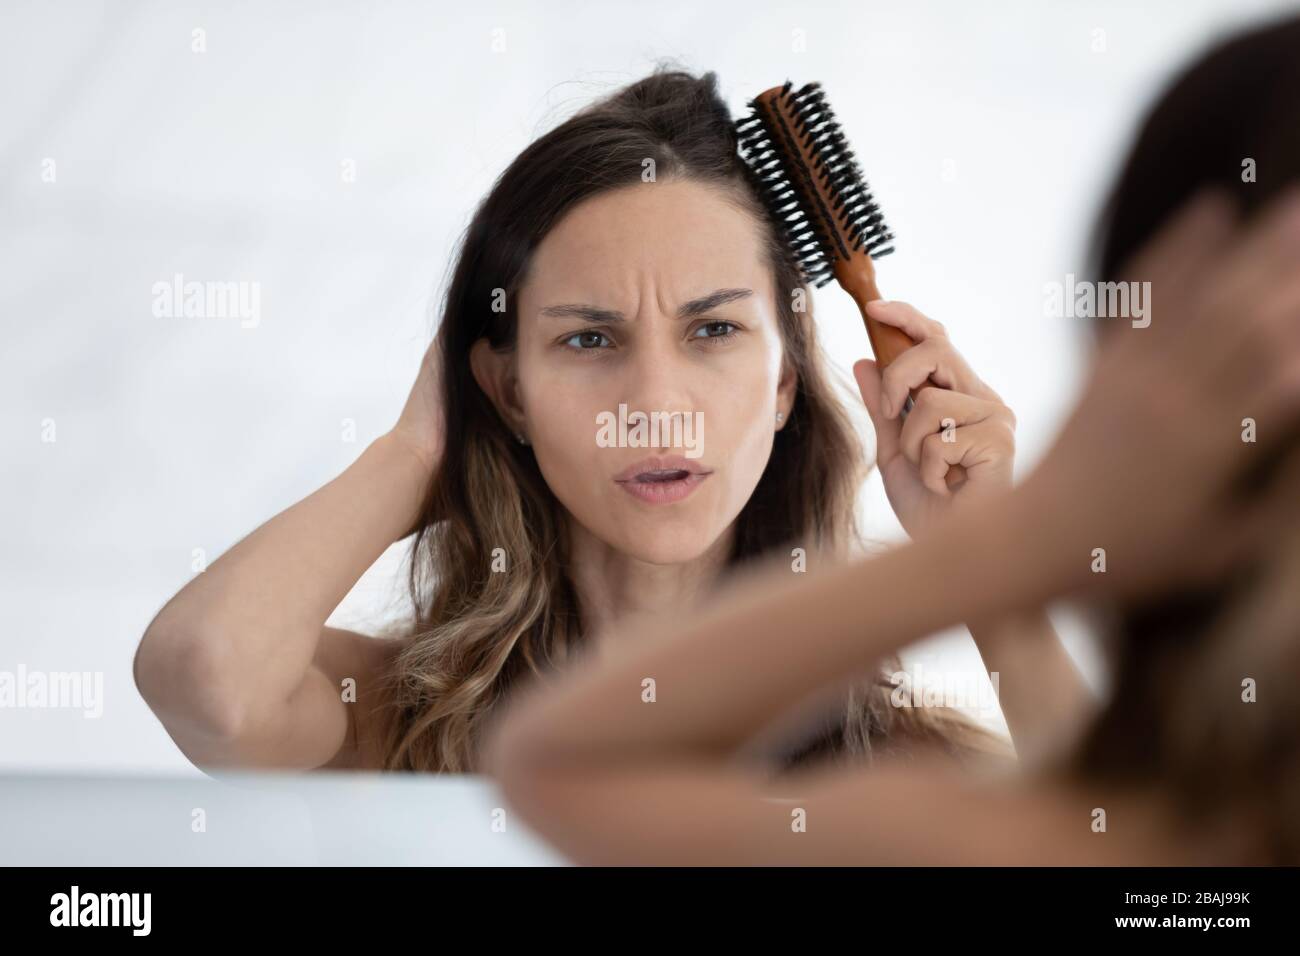 Woman looks in mirror combing hair feels dissatisfied hair condition Stock Photo